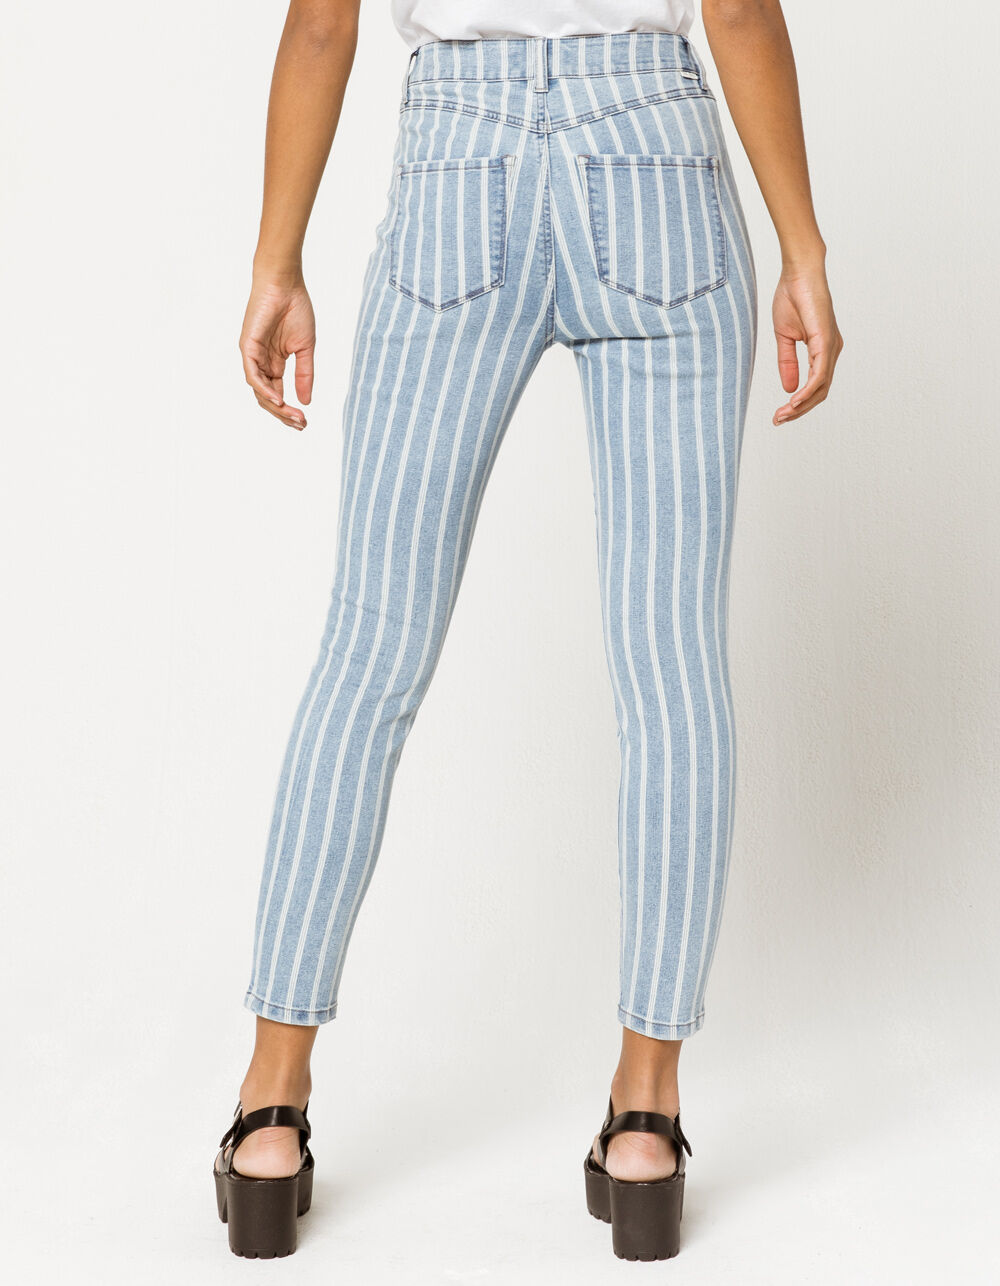 SKY AND SPARROW Stripe Skinny Crop Womens Jeans image number 2